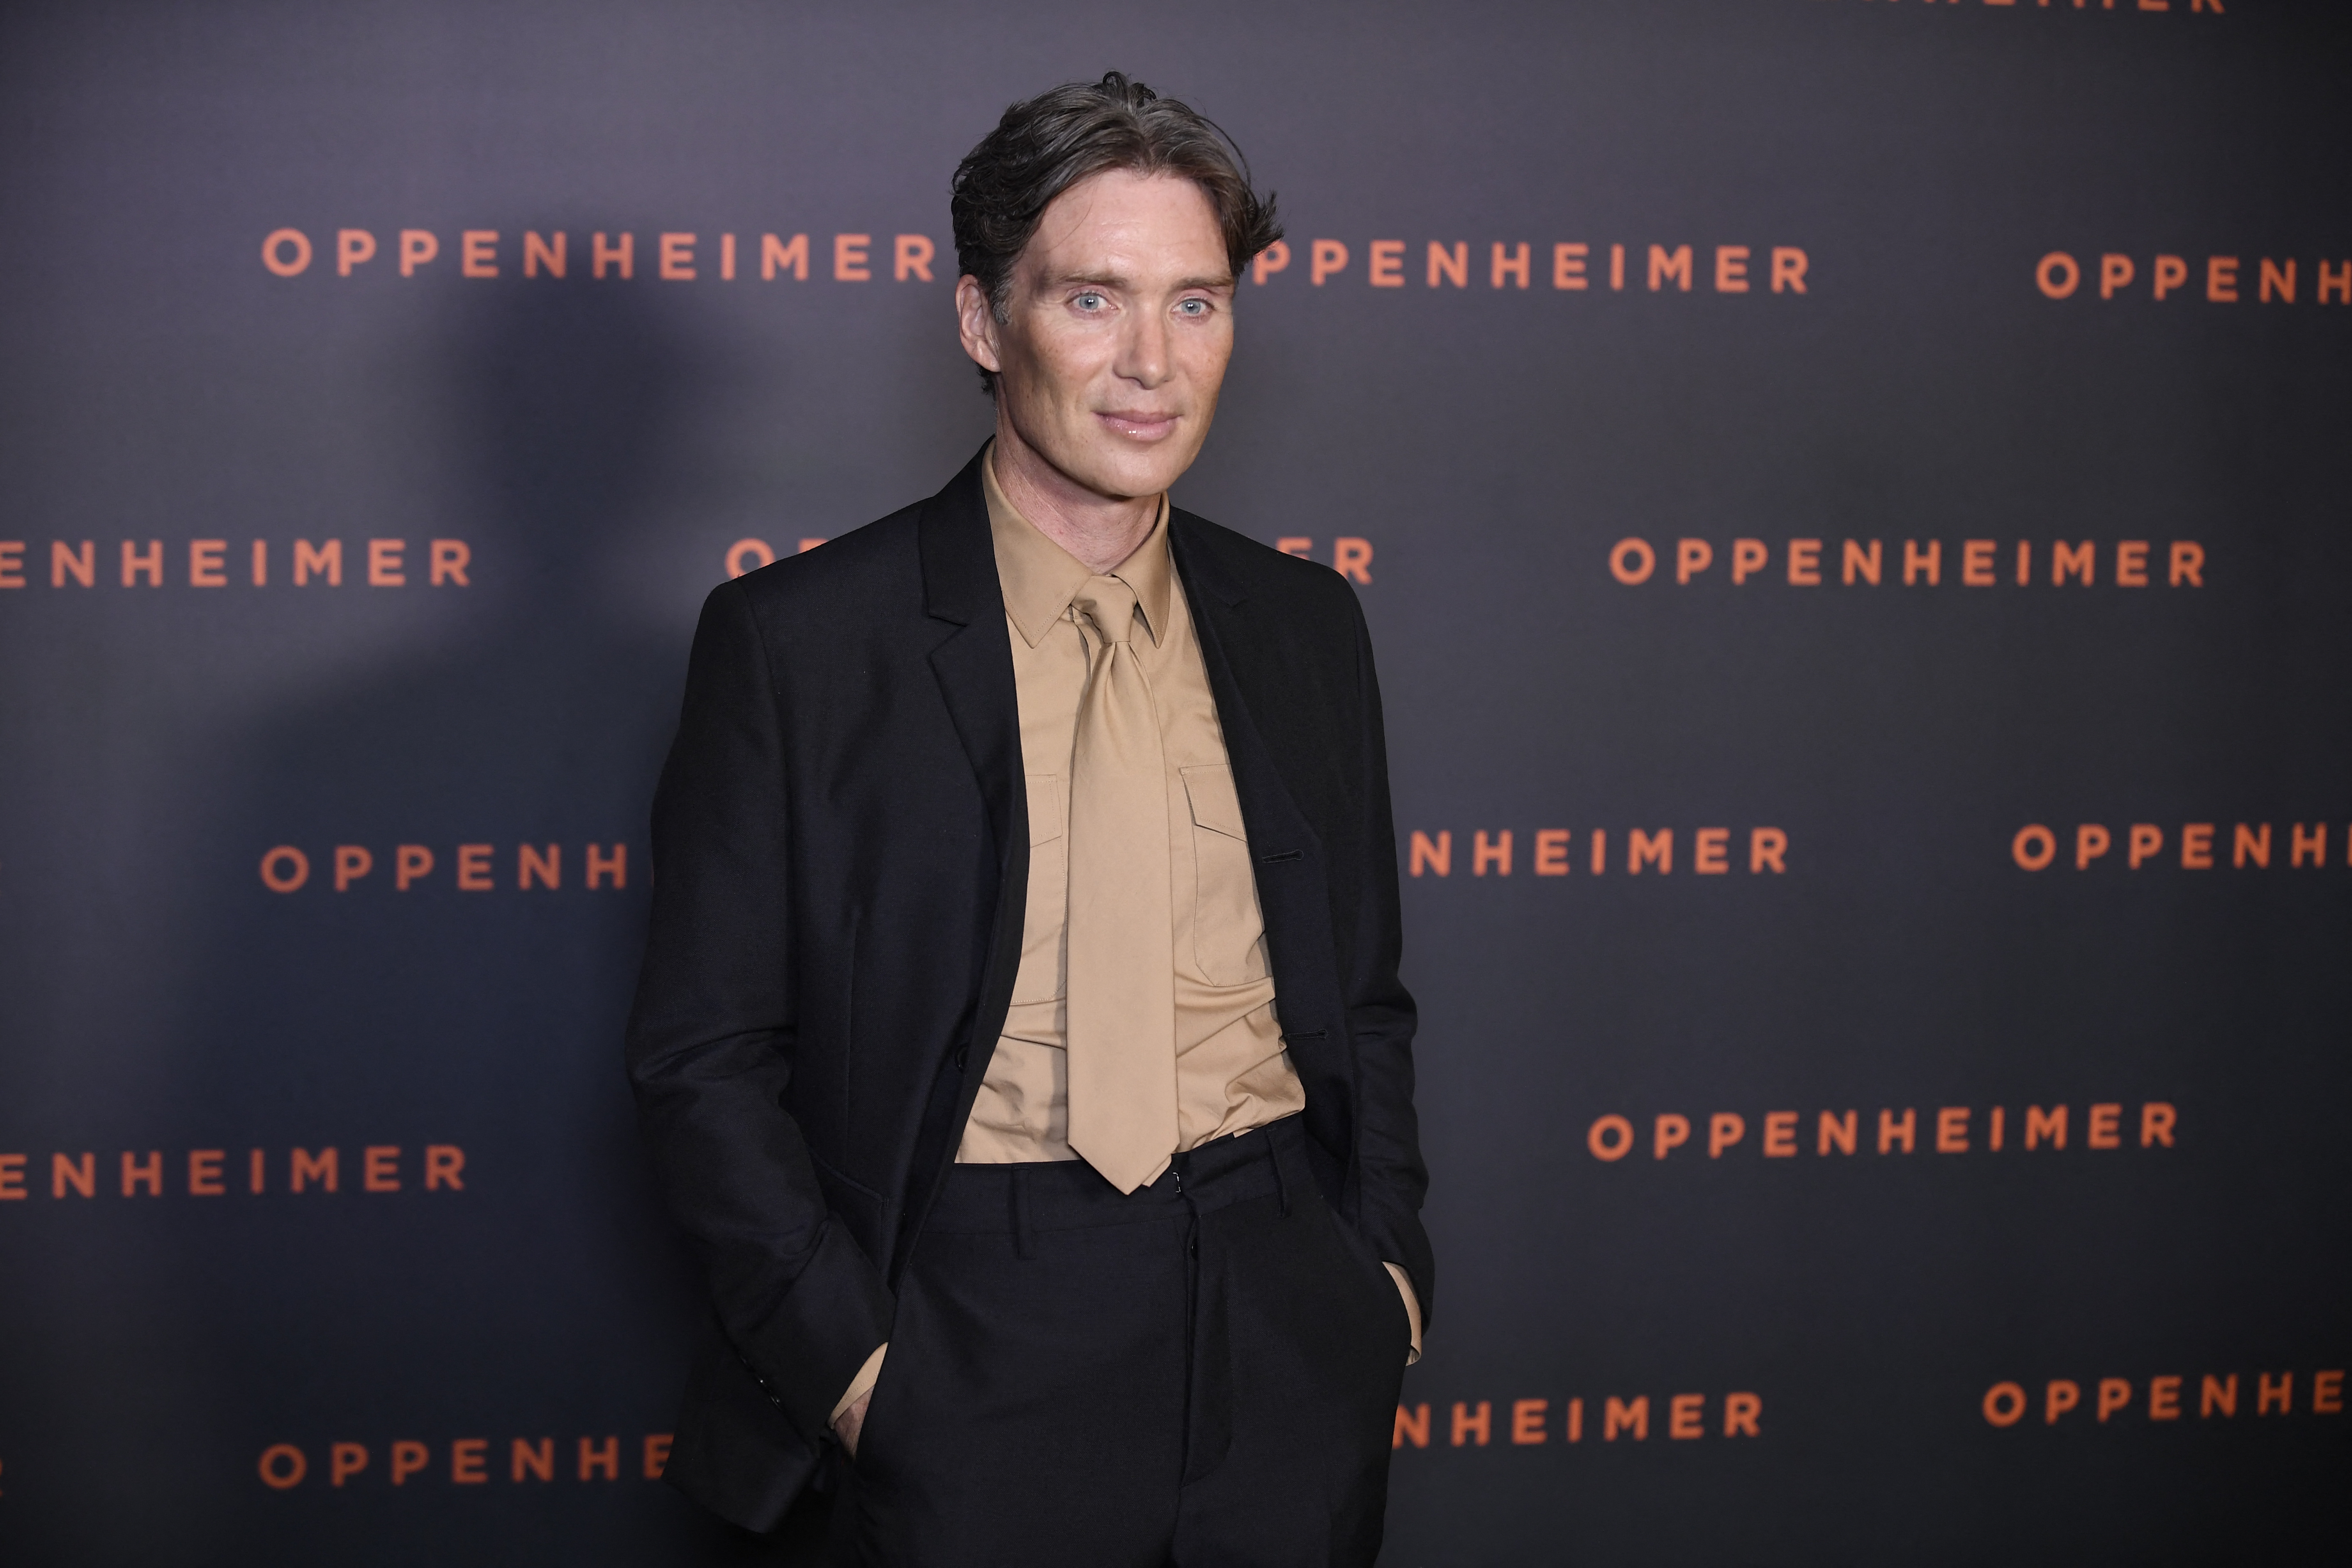 Cillian Murphy poses upon his arrival for the premiere of the movie "Oppenheimer" at the Grand Rex cinema in Paris on July 11, 2023. | Source: Getty Images